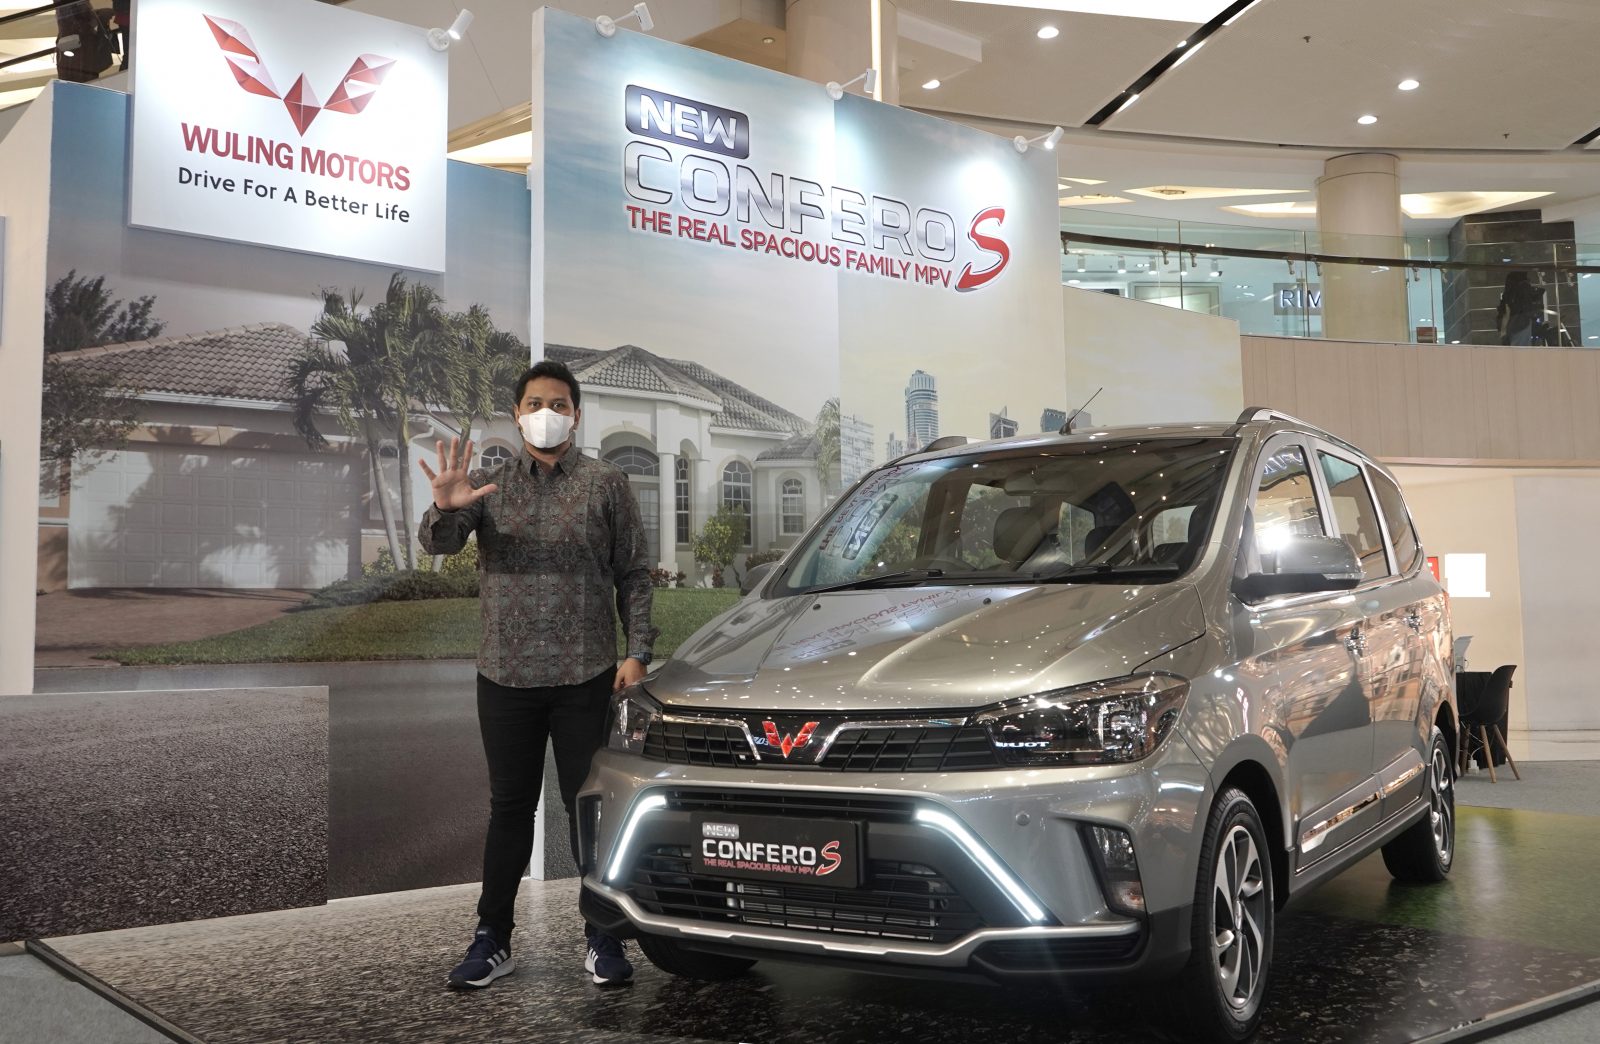 Image Wuling New Confero S Starts to be Marketed in Surabaya